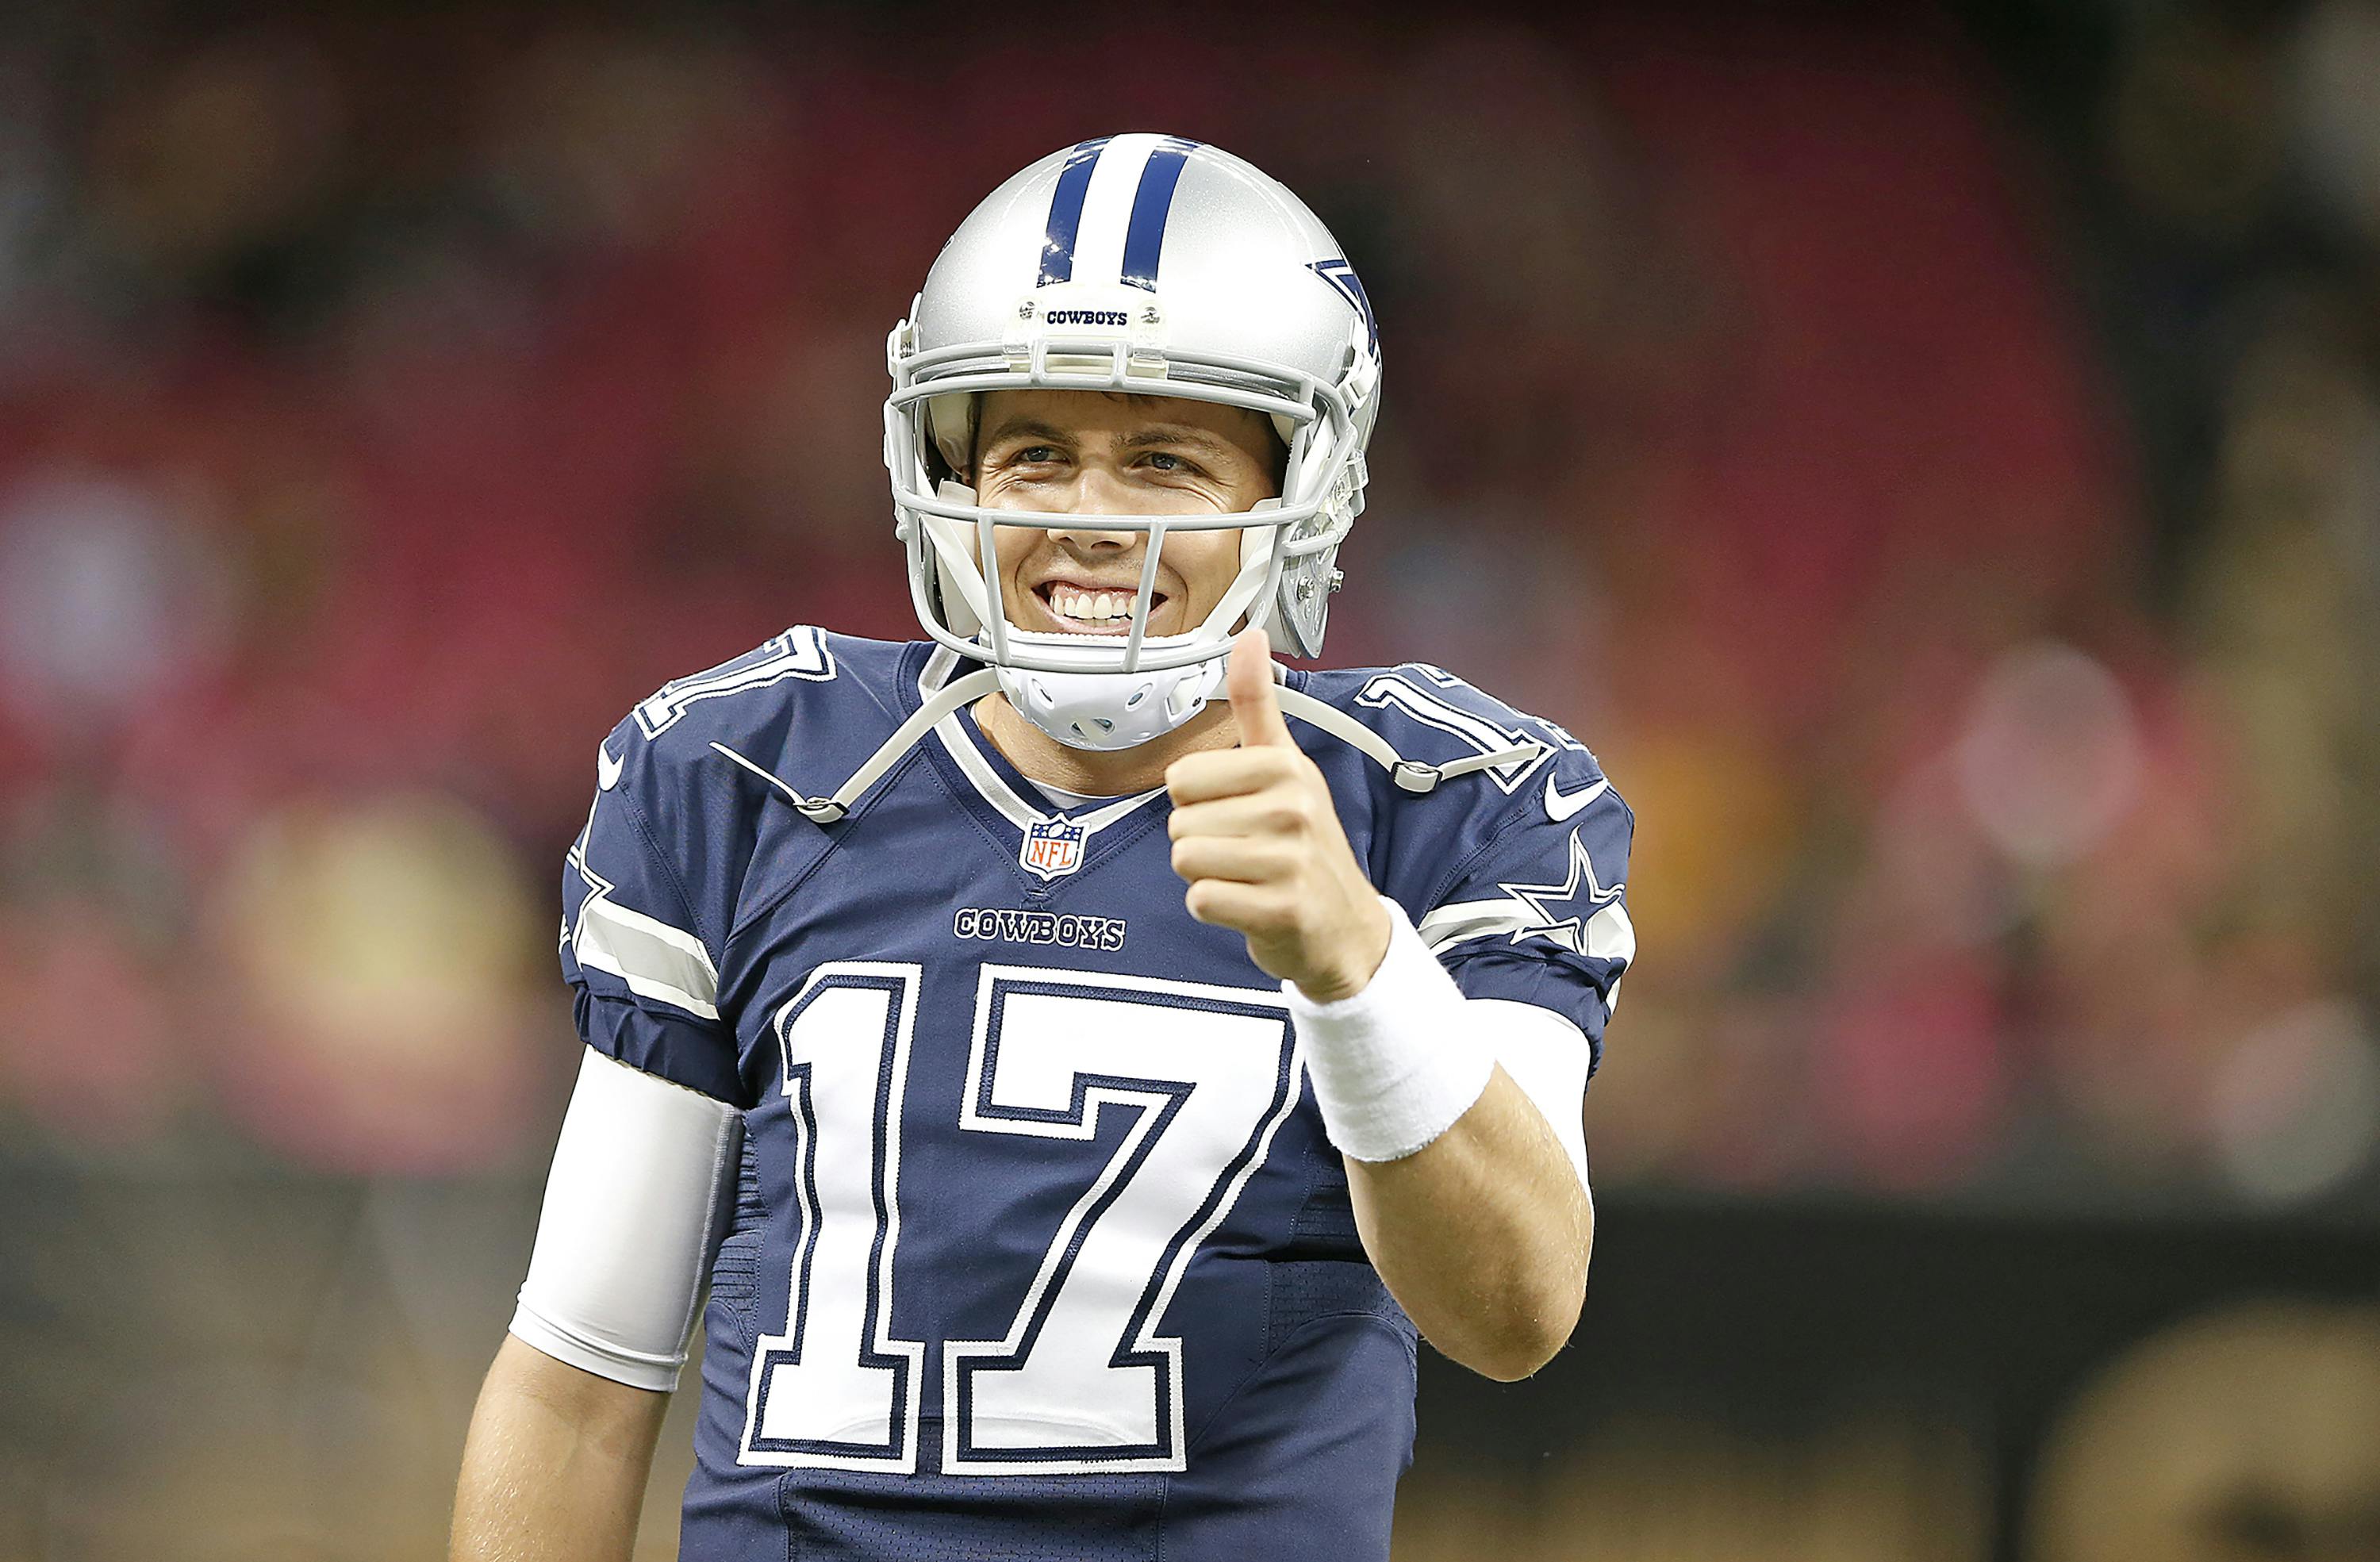 Dallas Cowboys quarterback Kellen Moore (17) gives a thumbs up before an NFL game against the New Orleans Saints at the Mercedes Benz Superdome in New Orleans, Louisiana, Sunday, October 4, 2015.   The Saints defeated the Cowboys in overtime, 26-20.  (James D. Smith via AP)